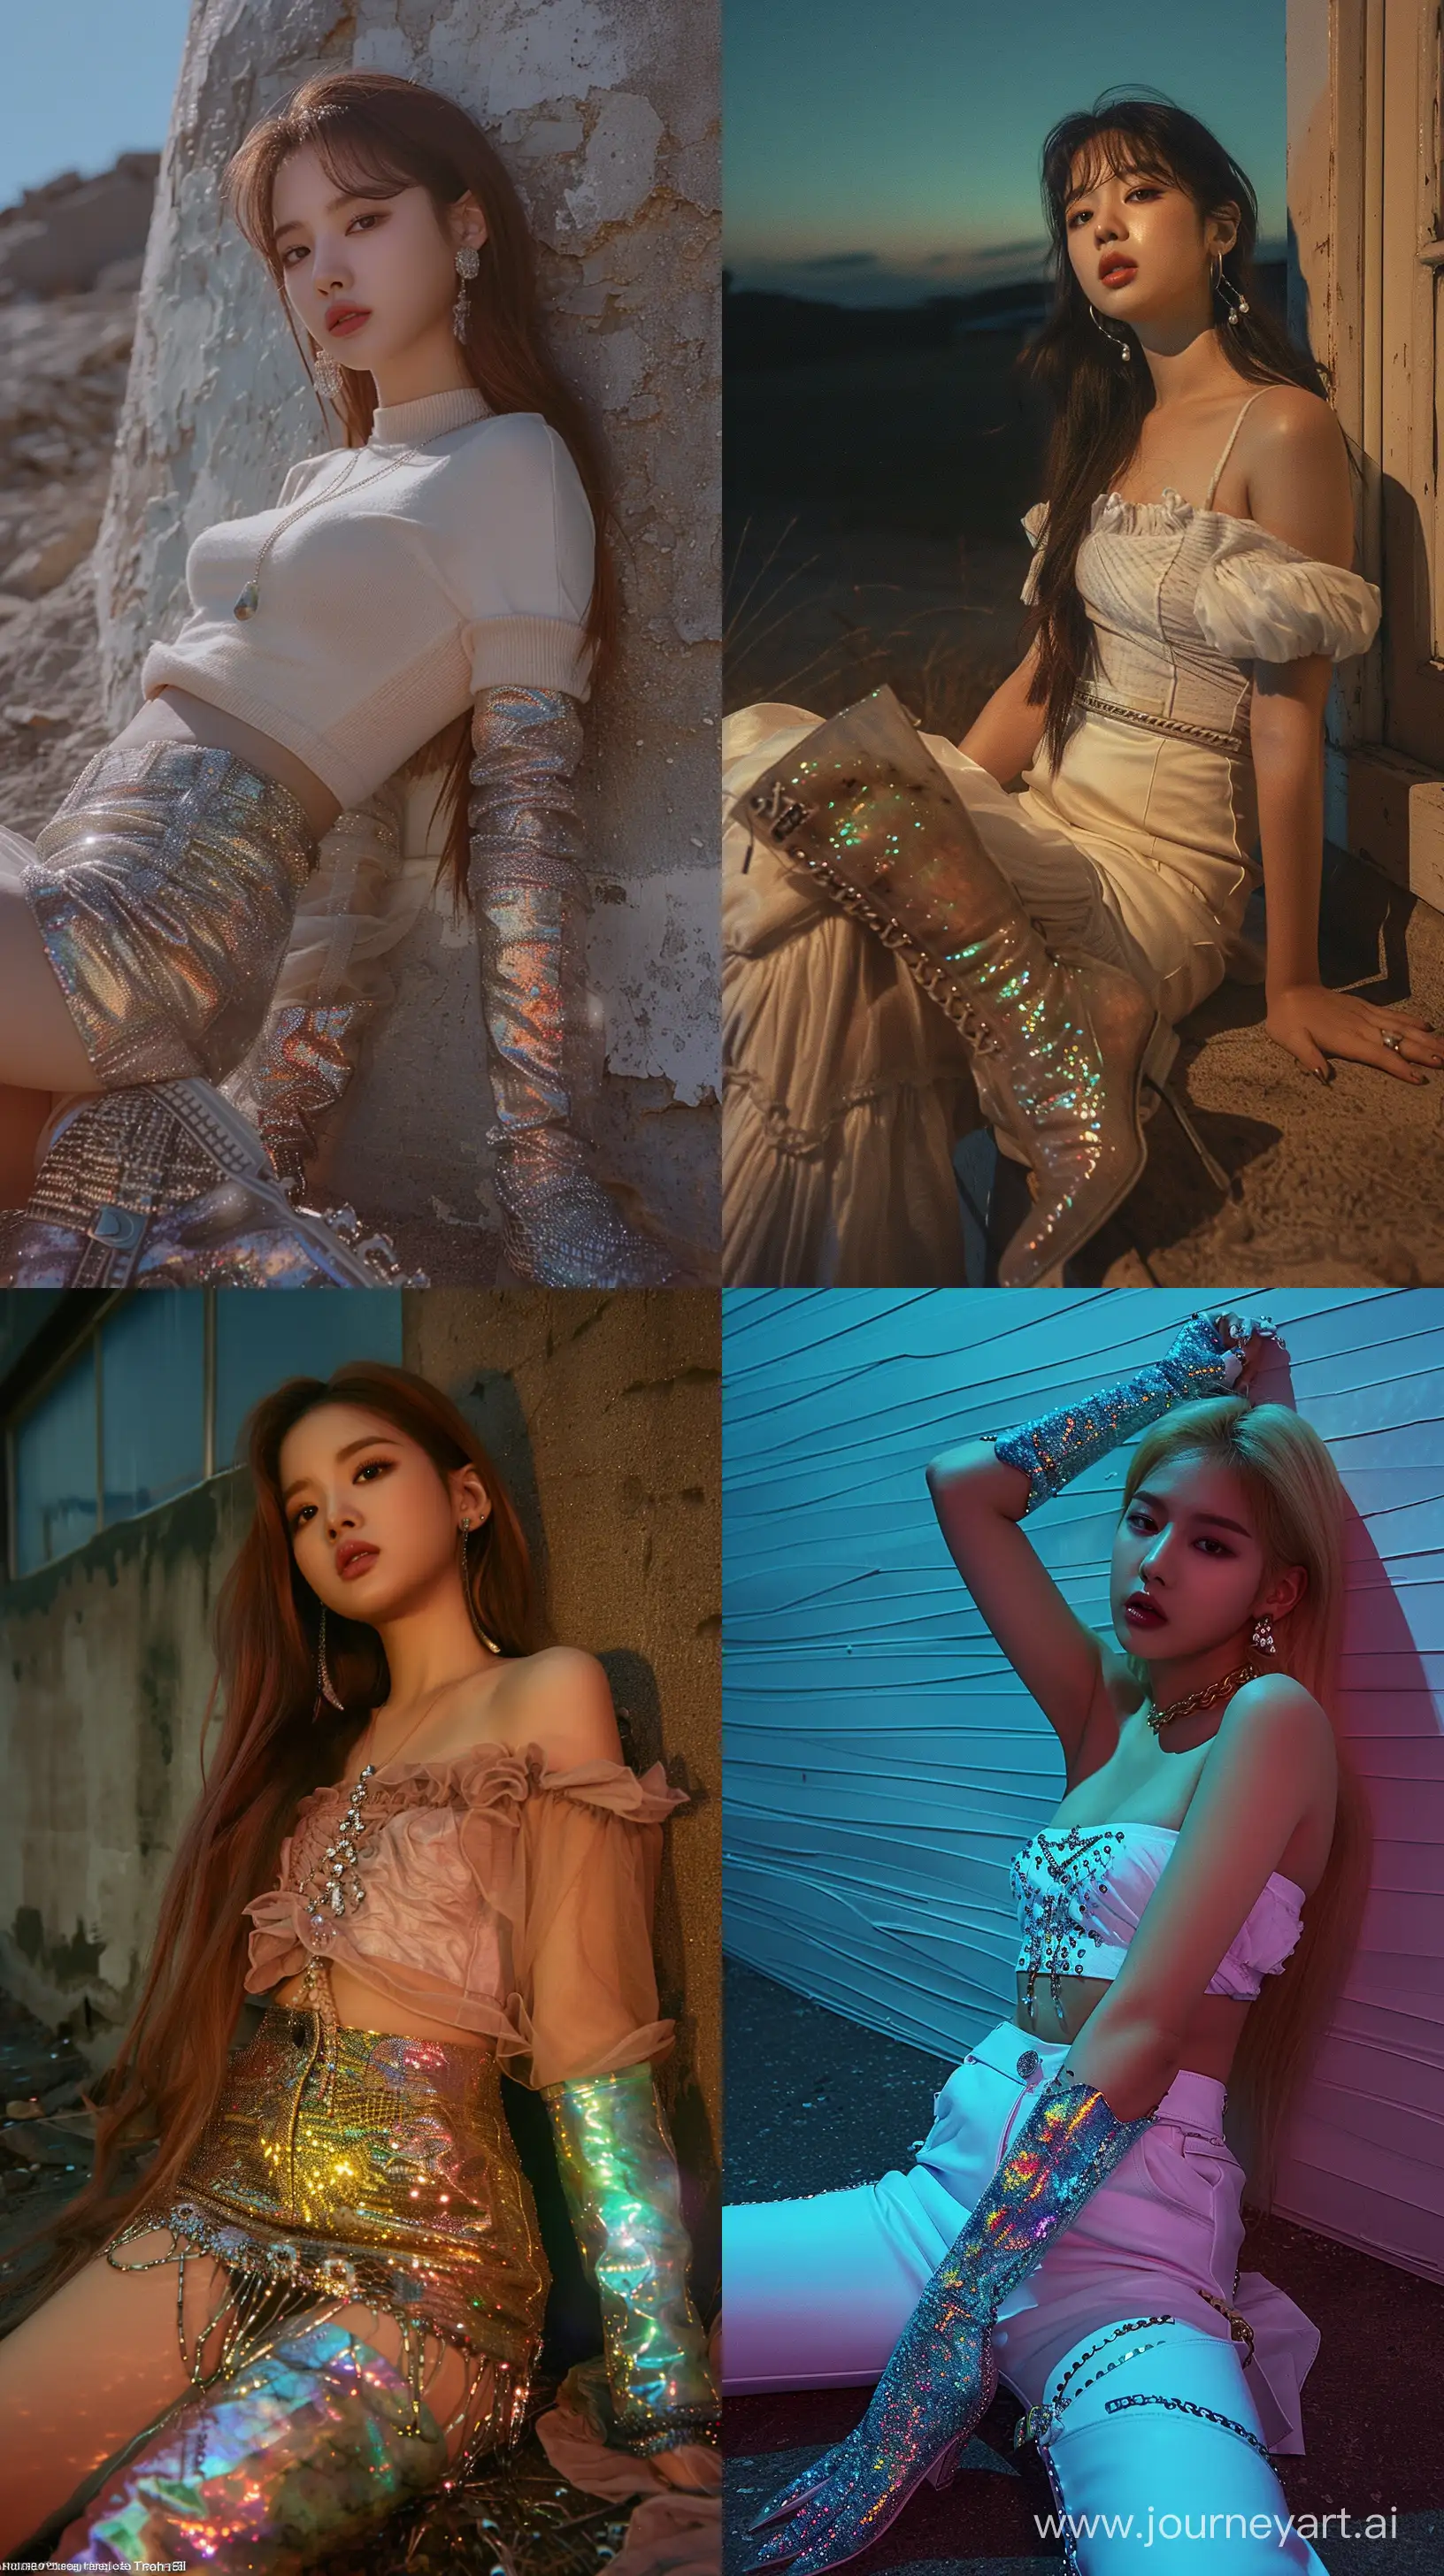 Jennie-Blackpink-Fashion-Crystal-Boots-in-Nocturnal-Setting